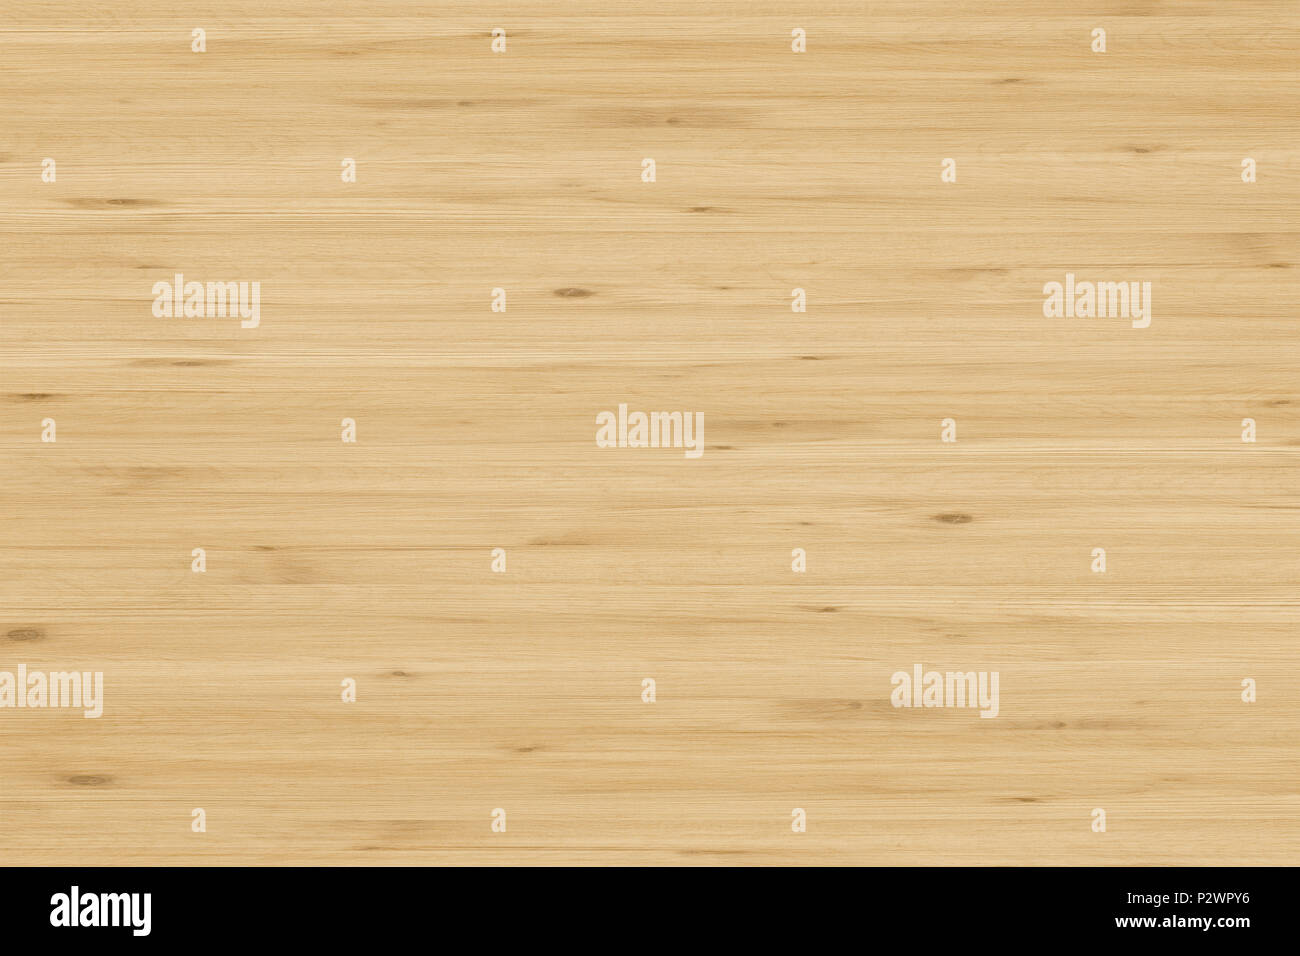 Brown grunge wood texture. Abstract rustic background Stock Photo